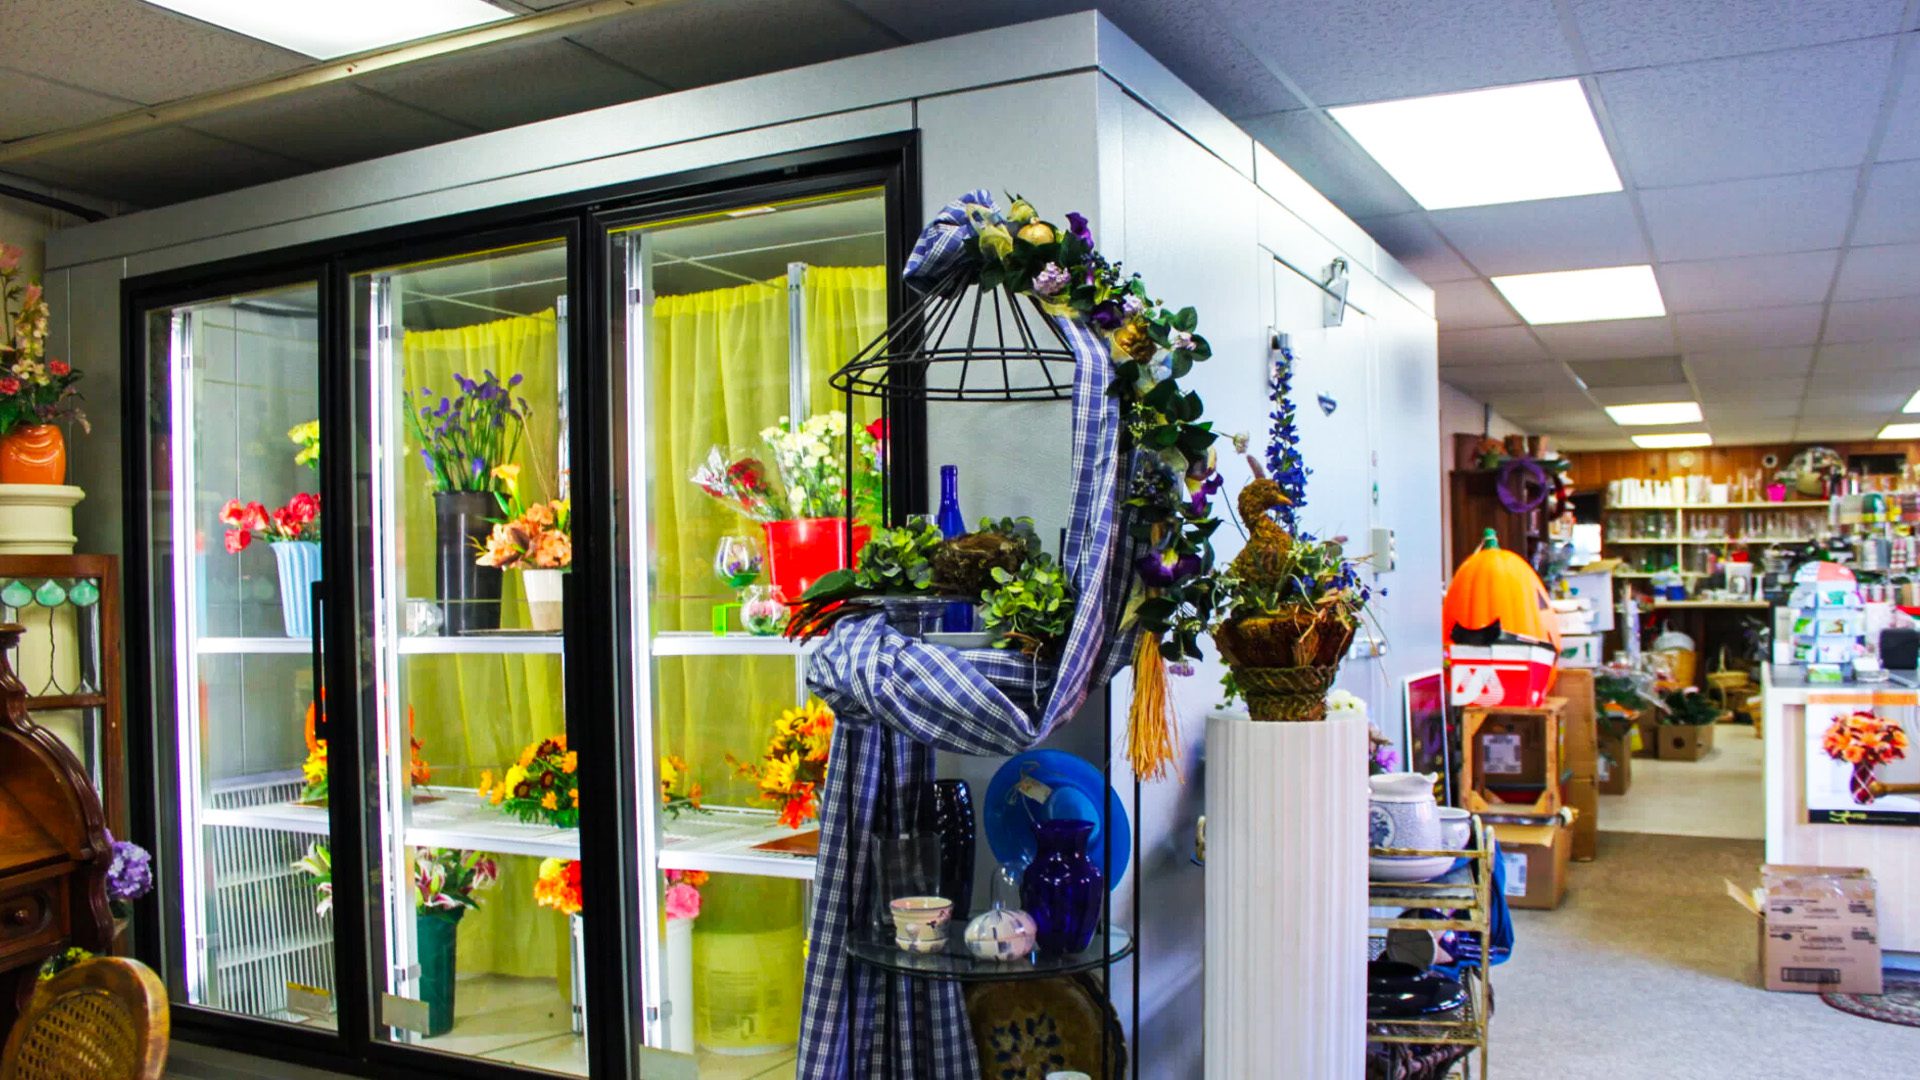 How to Keep Floral Walk-in Cooler in Good Shape? An Unexpected Revelation Awaits